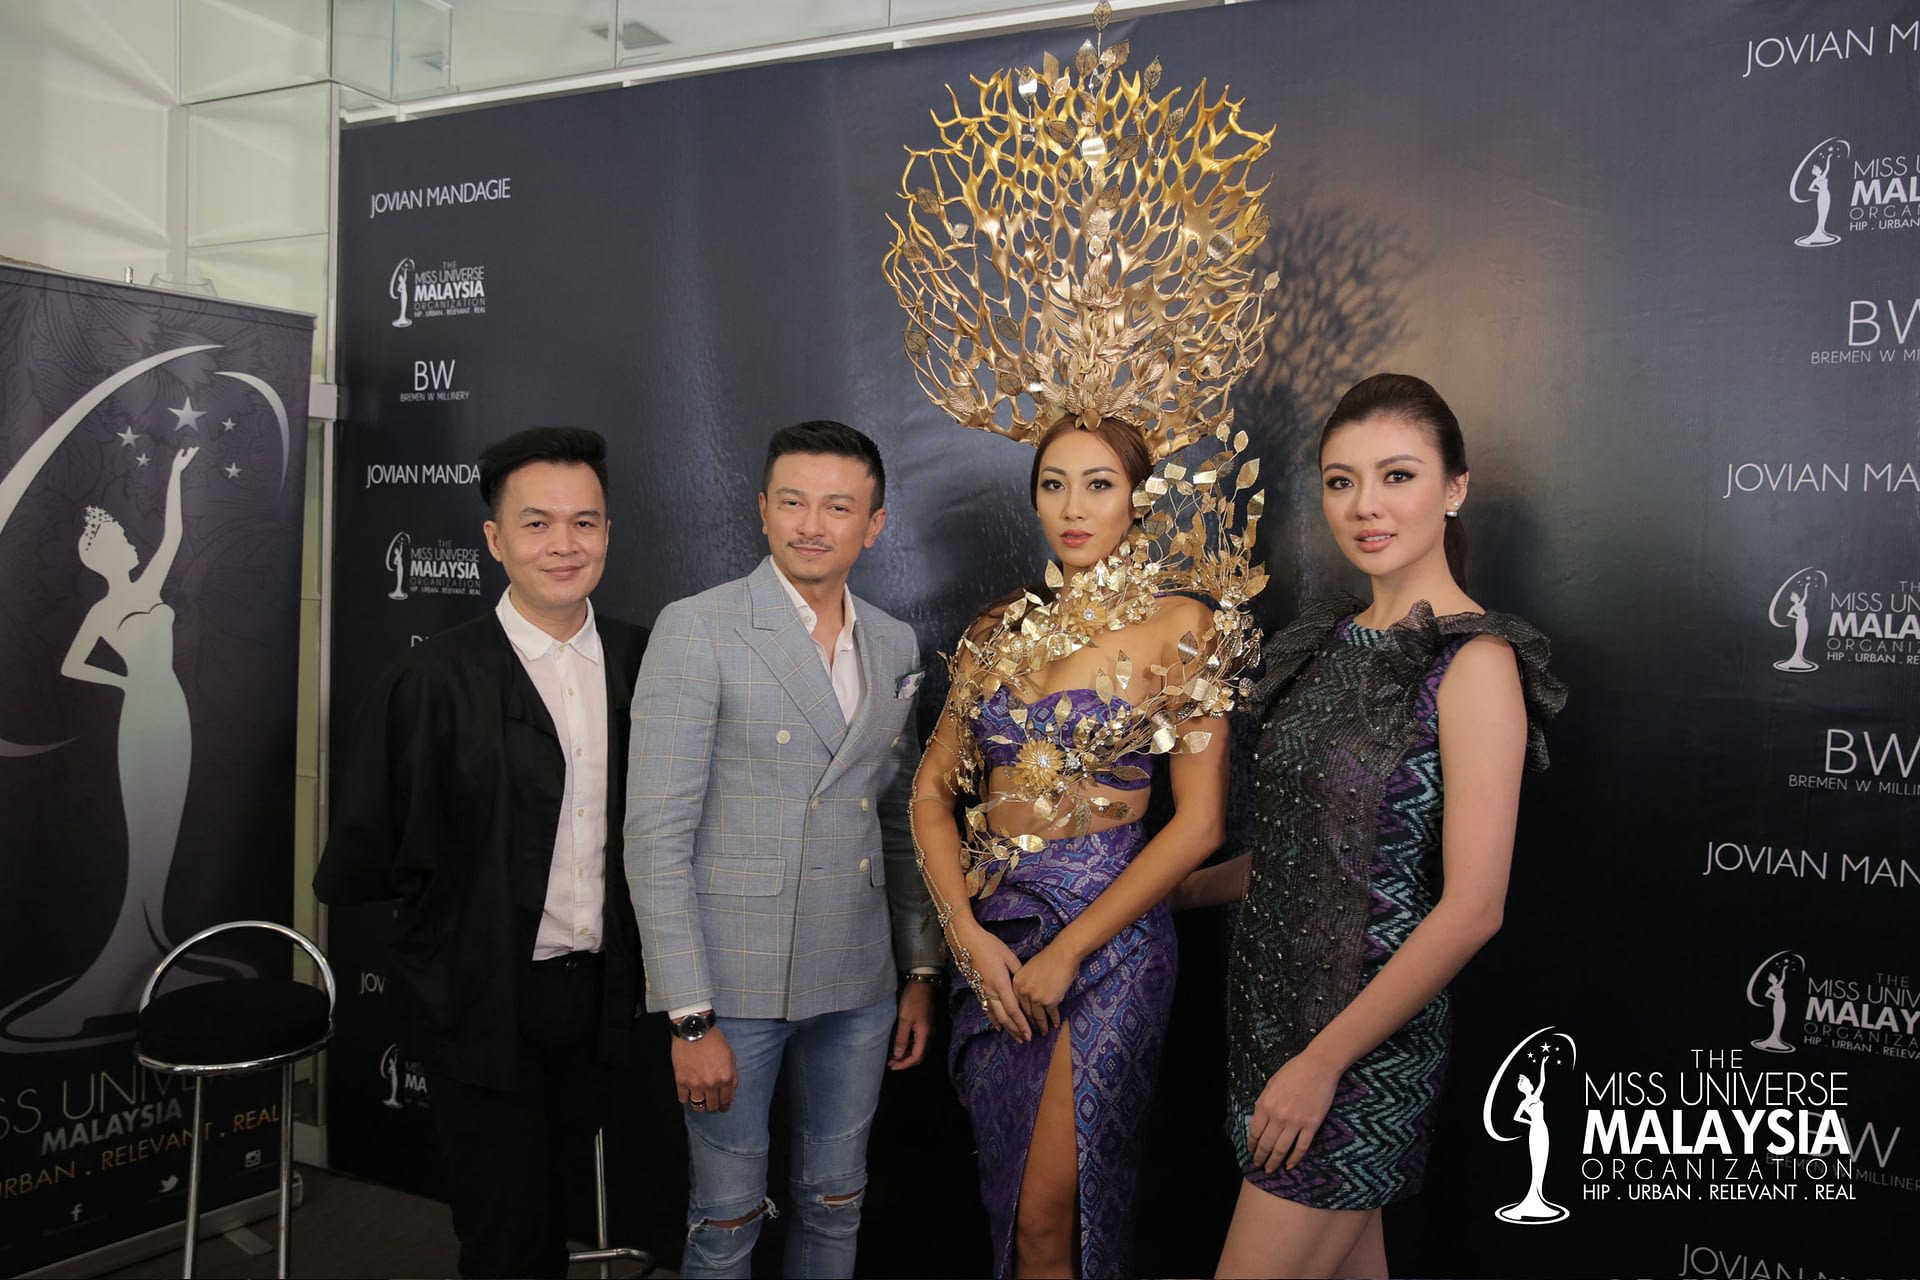 BUNGA MAS’ NATIONAL COSTUME & EVENING GOWN TO DEBUT IN LAS VEGAS FOR THE 64TH MISS UNIVERSE PAGEANT